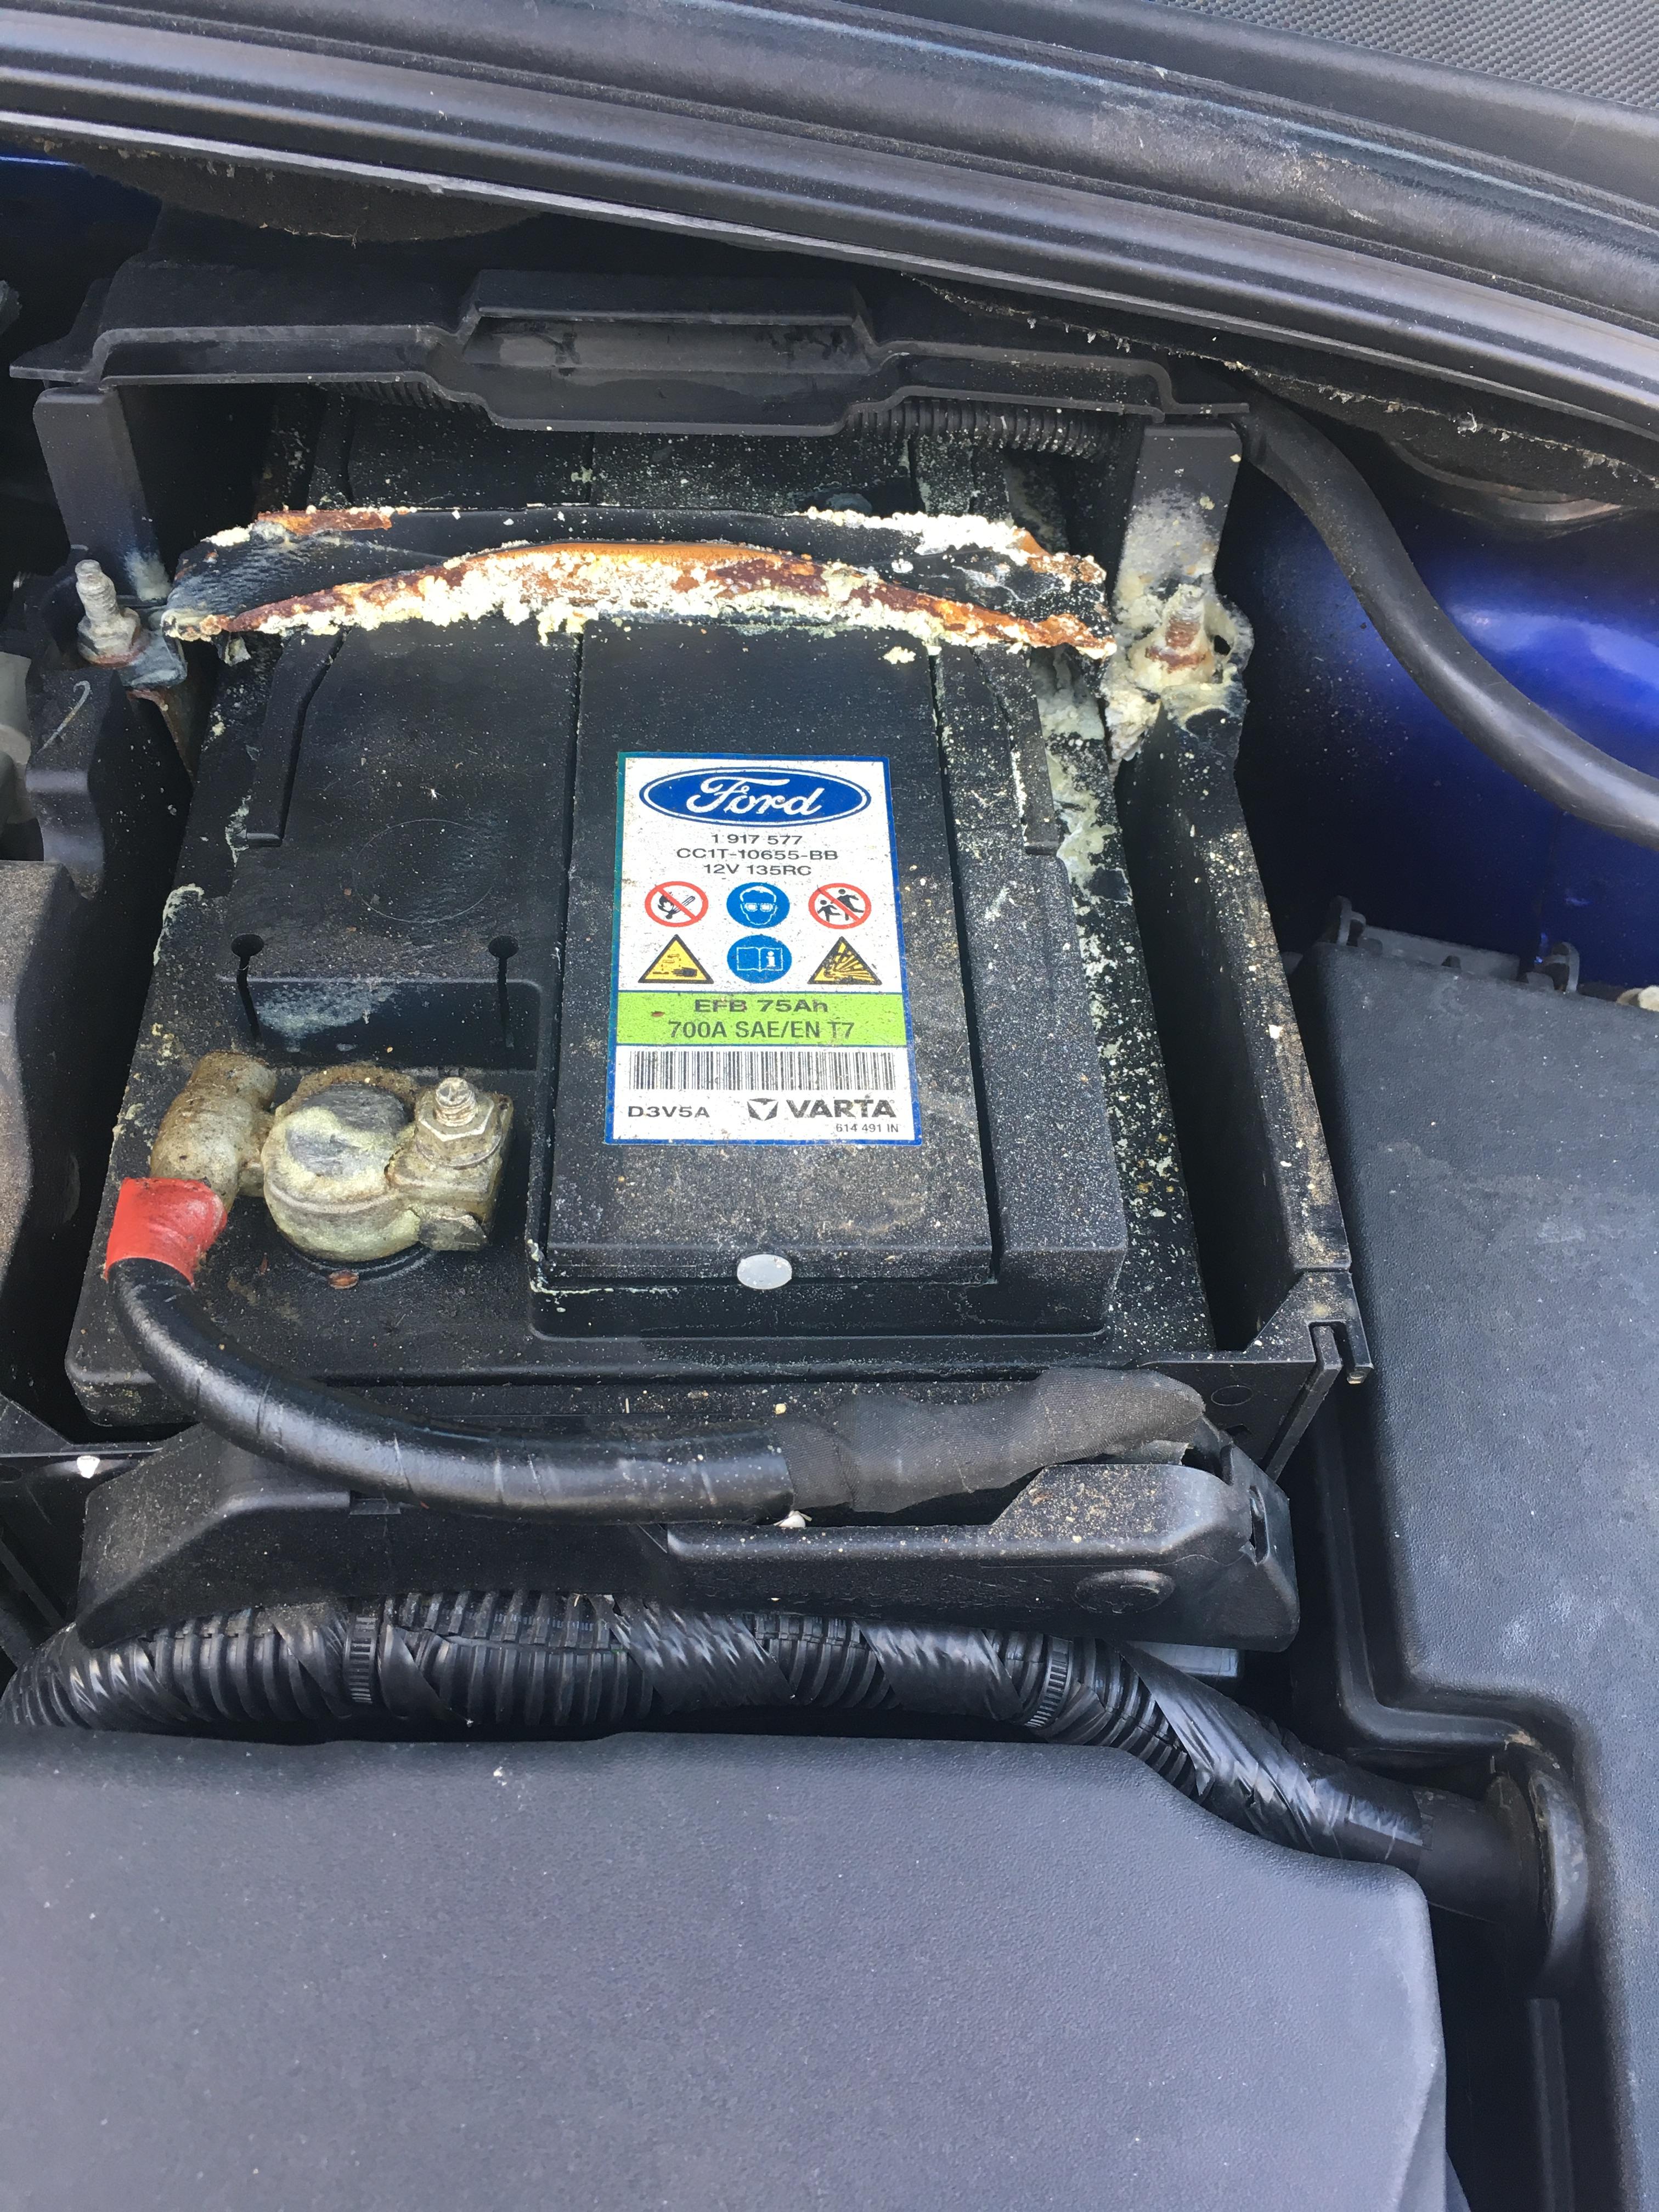 Battery Dying Quickly Is It Done Ford Focus Club Ford Owners Club Ford Forums